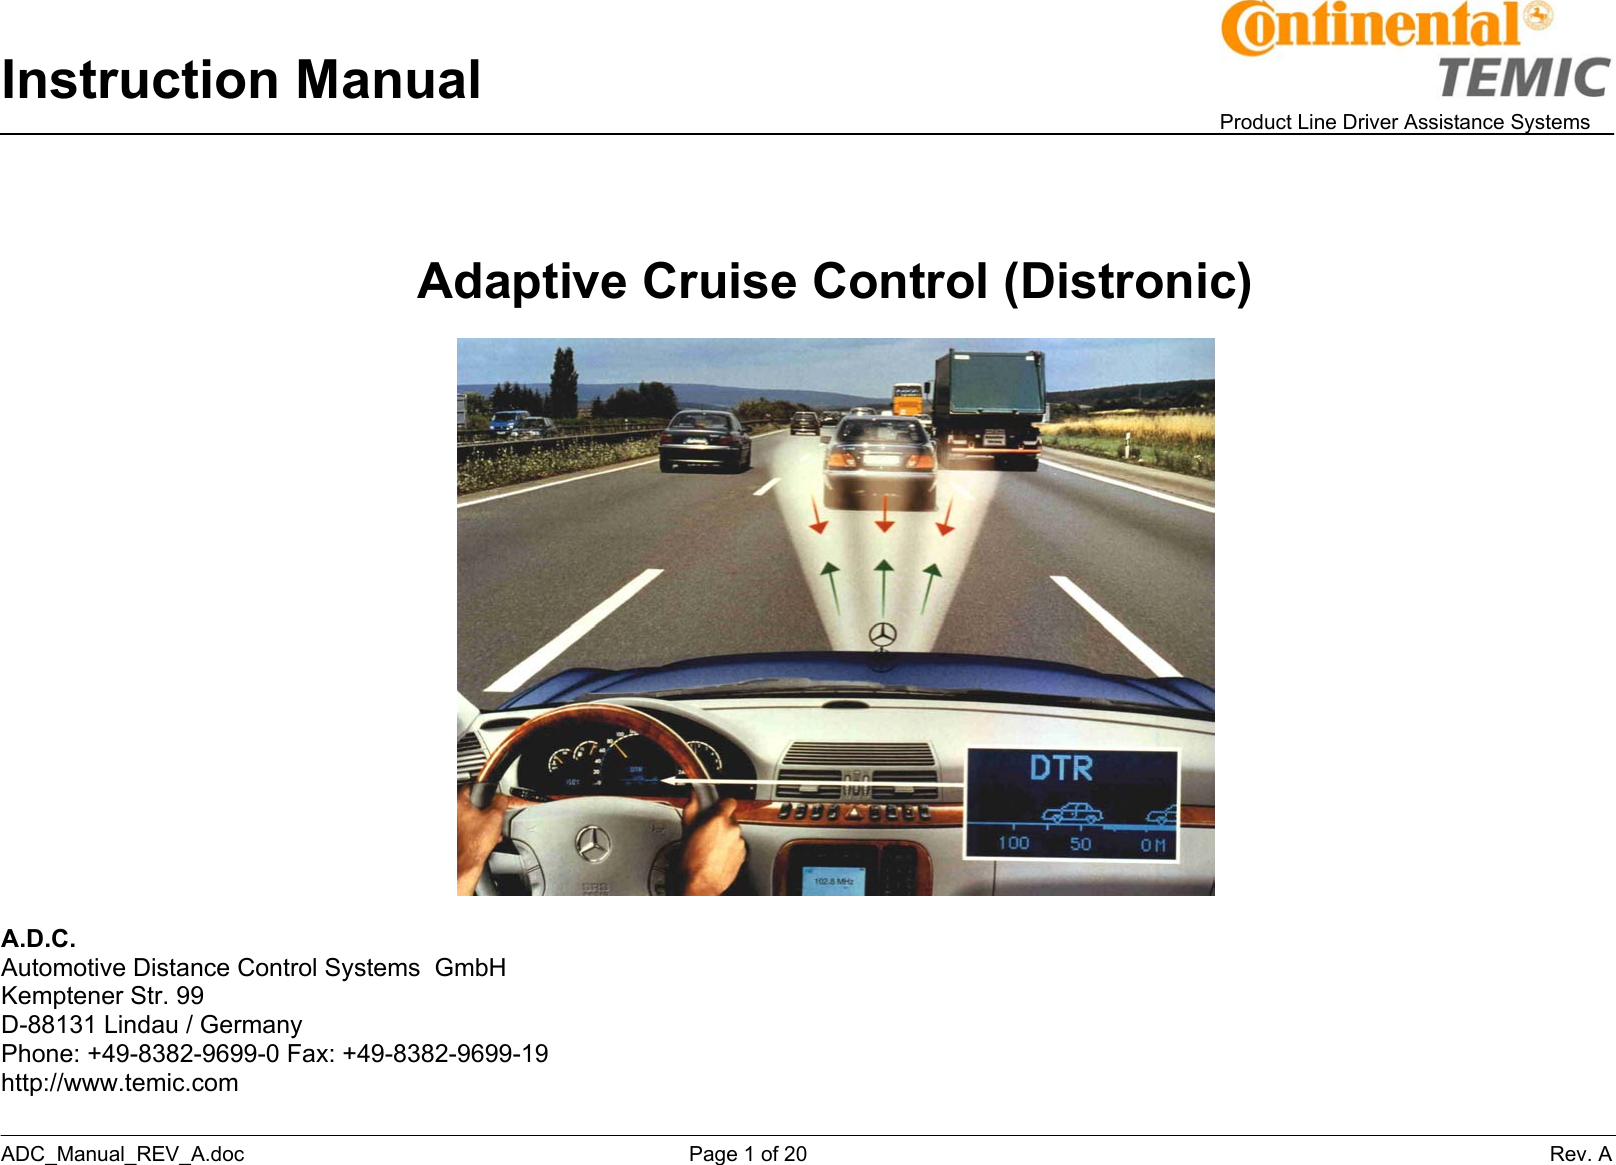 Instruction Manual    Product Line Driver Assistance Systems ADC_Manual_REV_A.doc     Page 1 of 20                 Rev. A    Adaptive Cruise Control (Distronic)    A.D.C. Automotive Distance Control Systems  GmbH Kemptener Str. 99 D-88131 Lindau / Germany Phone: +49-8382-9699-0 Fax: +49-8382-9699-19 http://www.temic.com 